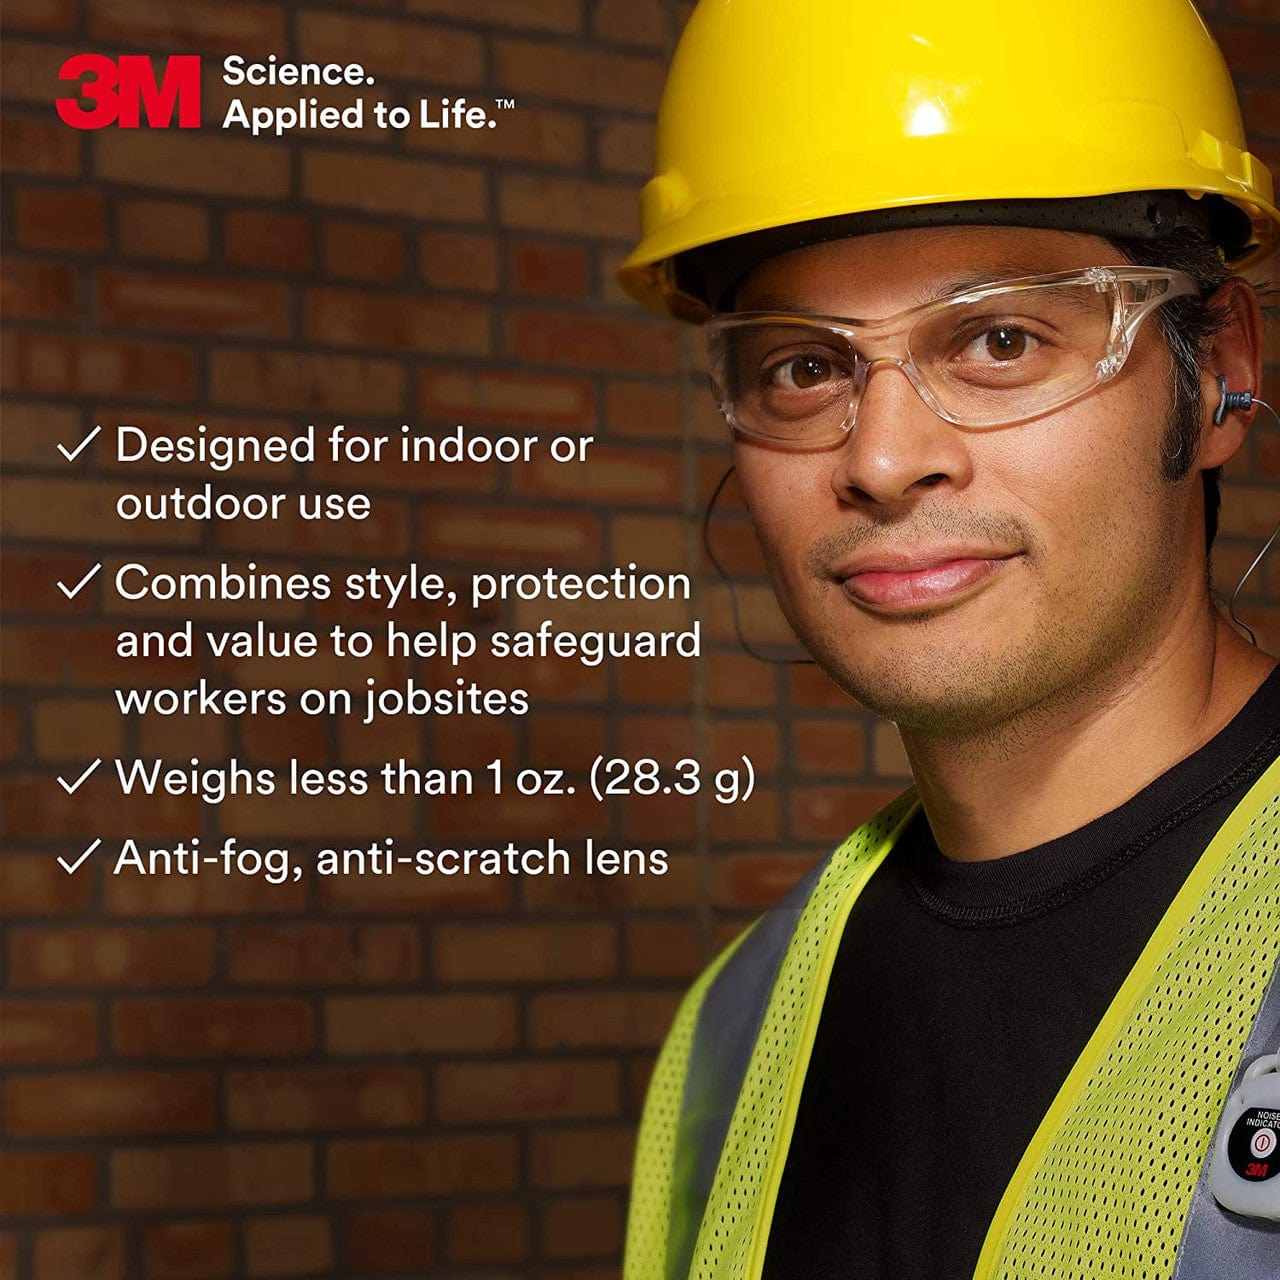 3M Virtua AP Safety Glasses with Clear Anti-Fog Lens 11818 Specs